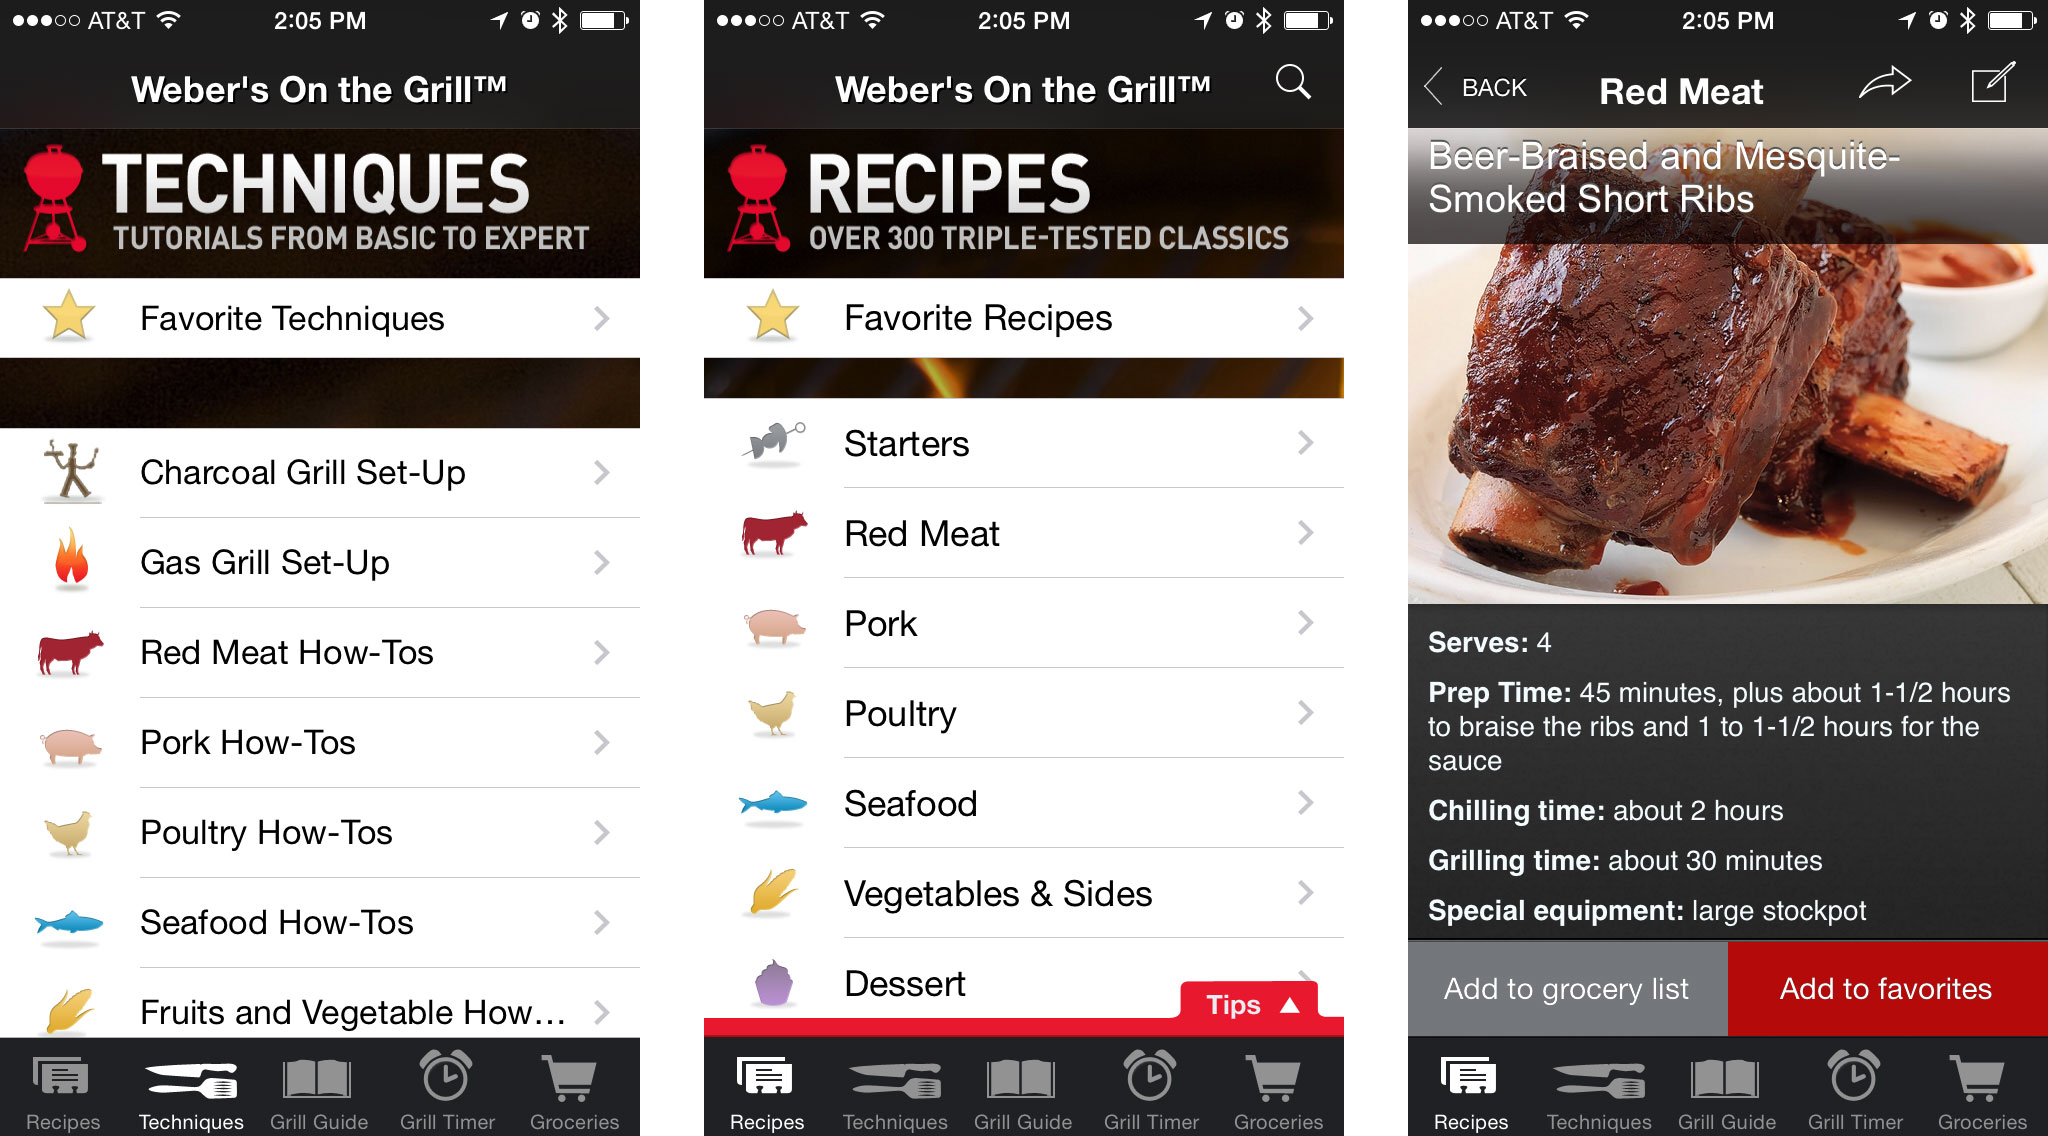 Best barbecue and grilling apps for iPhone: Weber's On the Grill